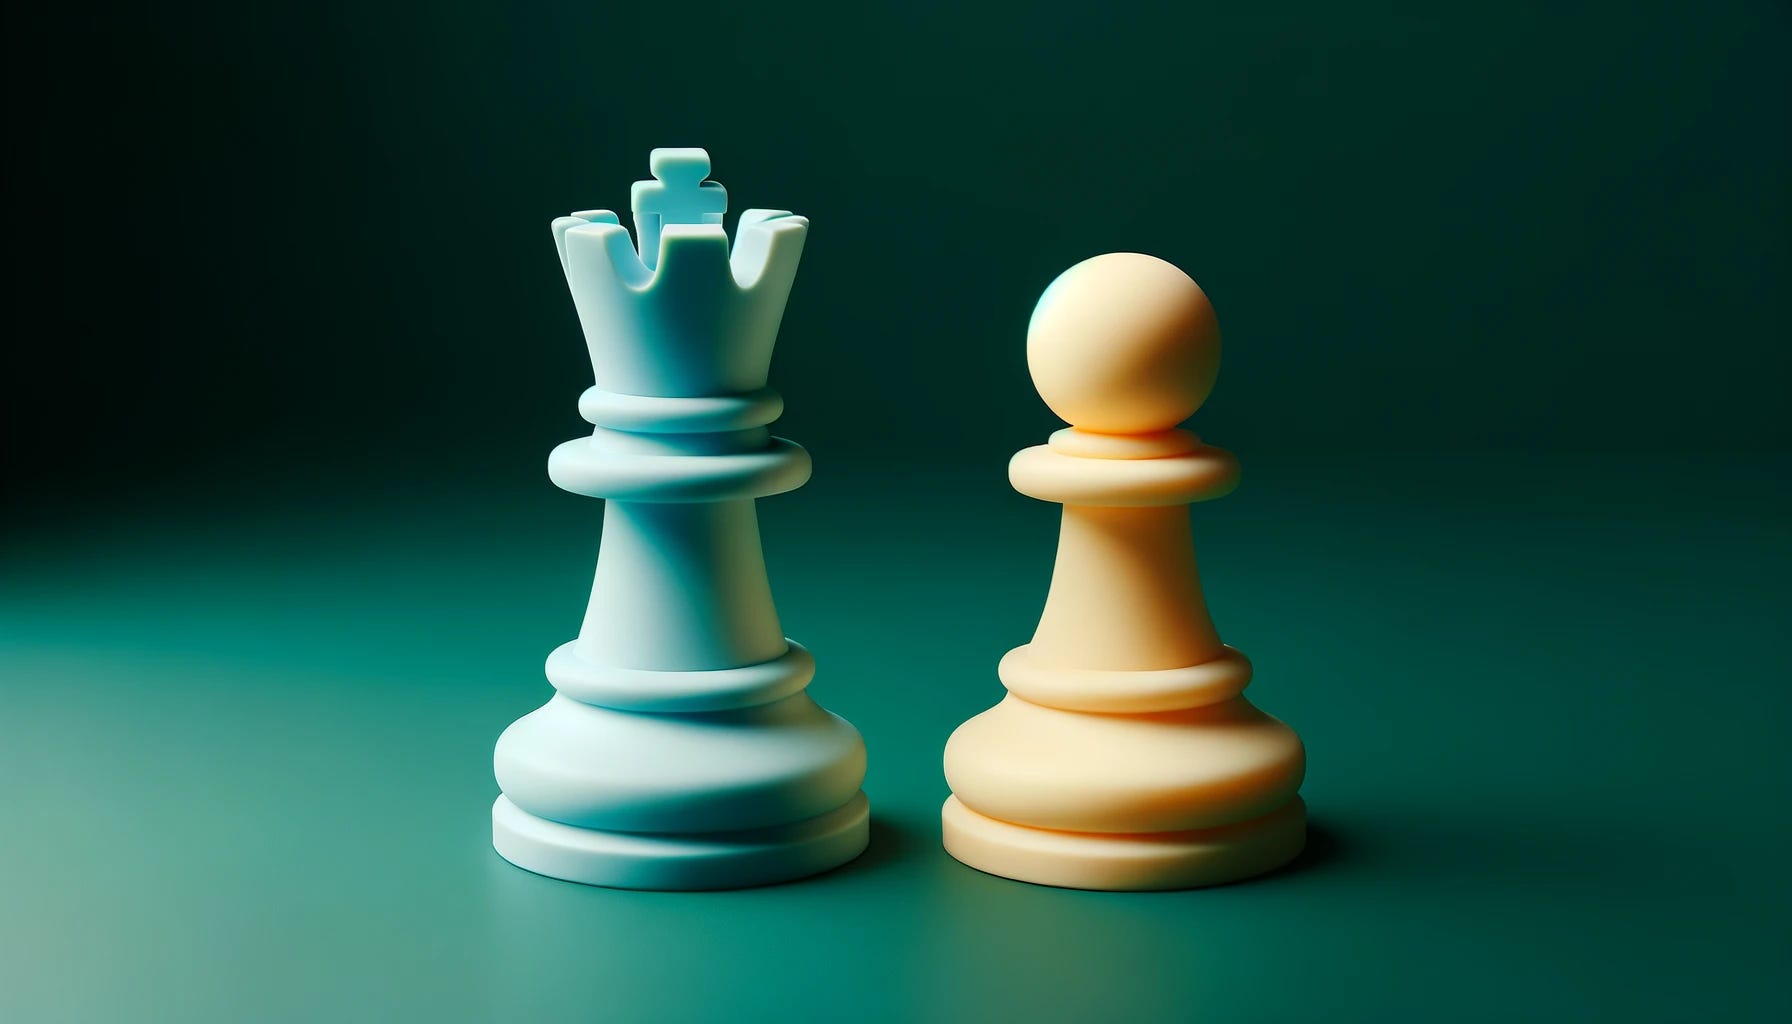 A chess rating system for evolutionary algorithms: A new method